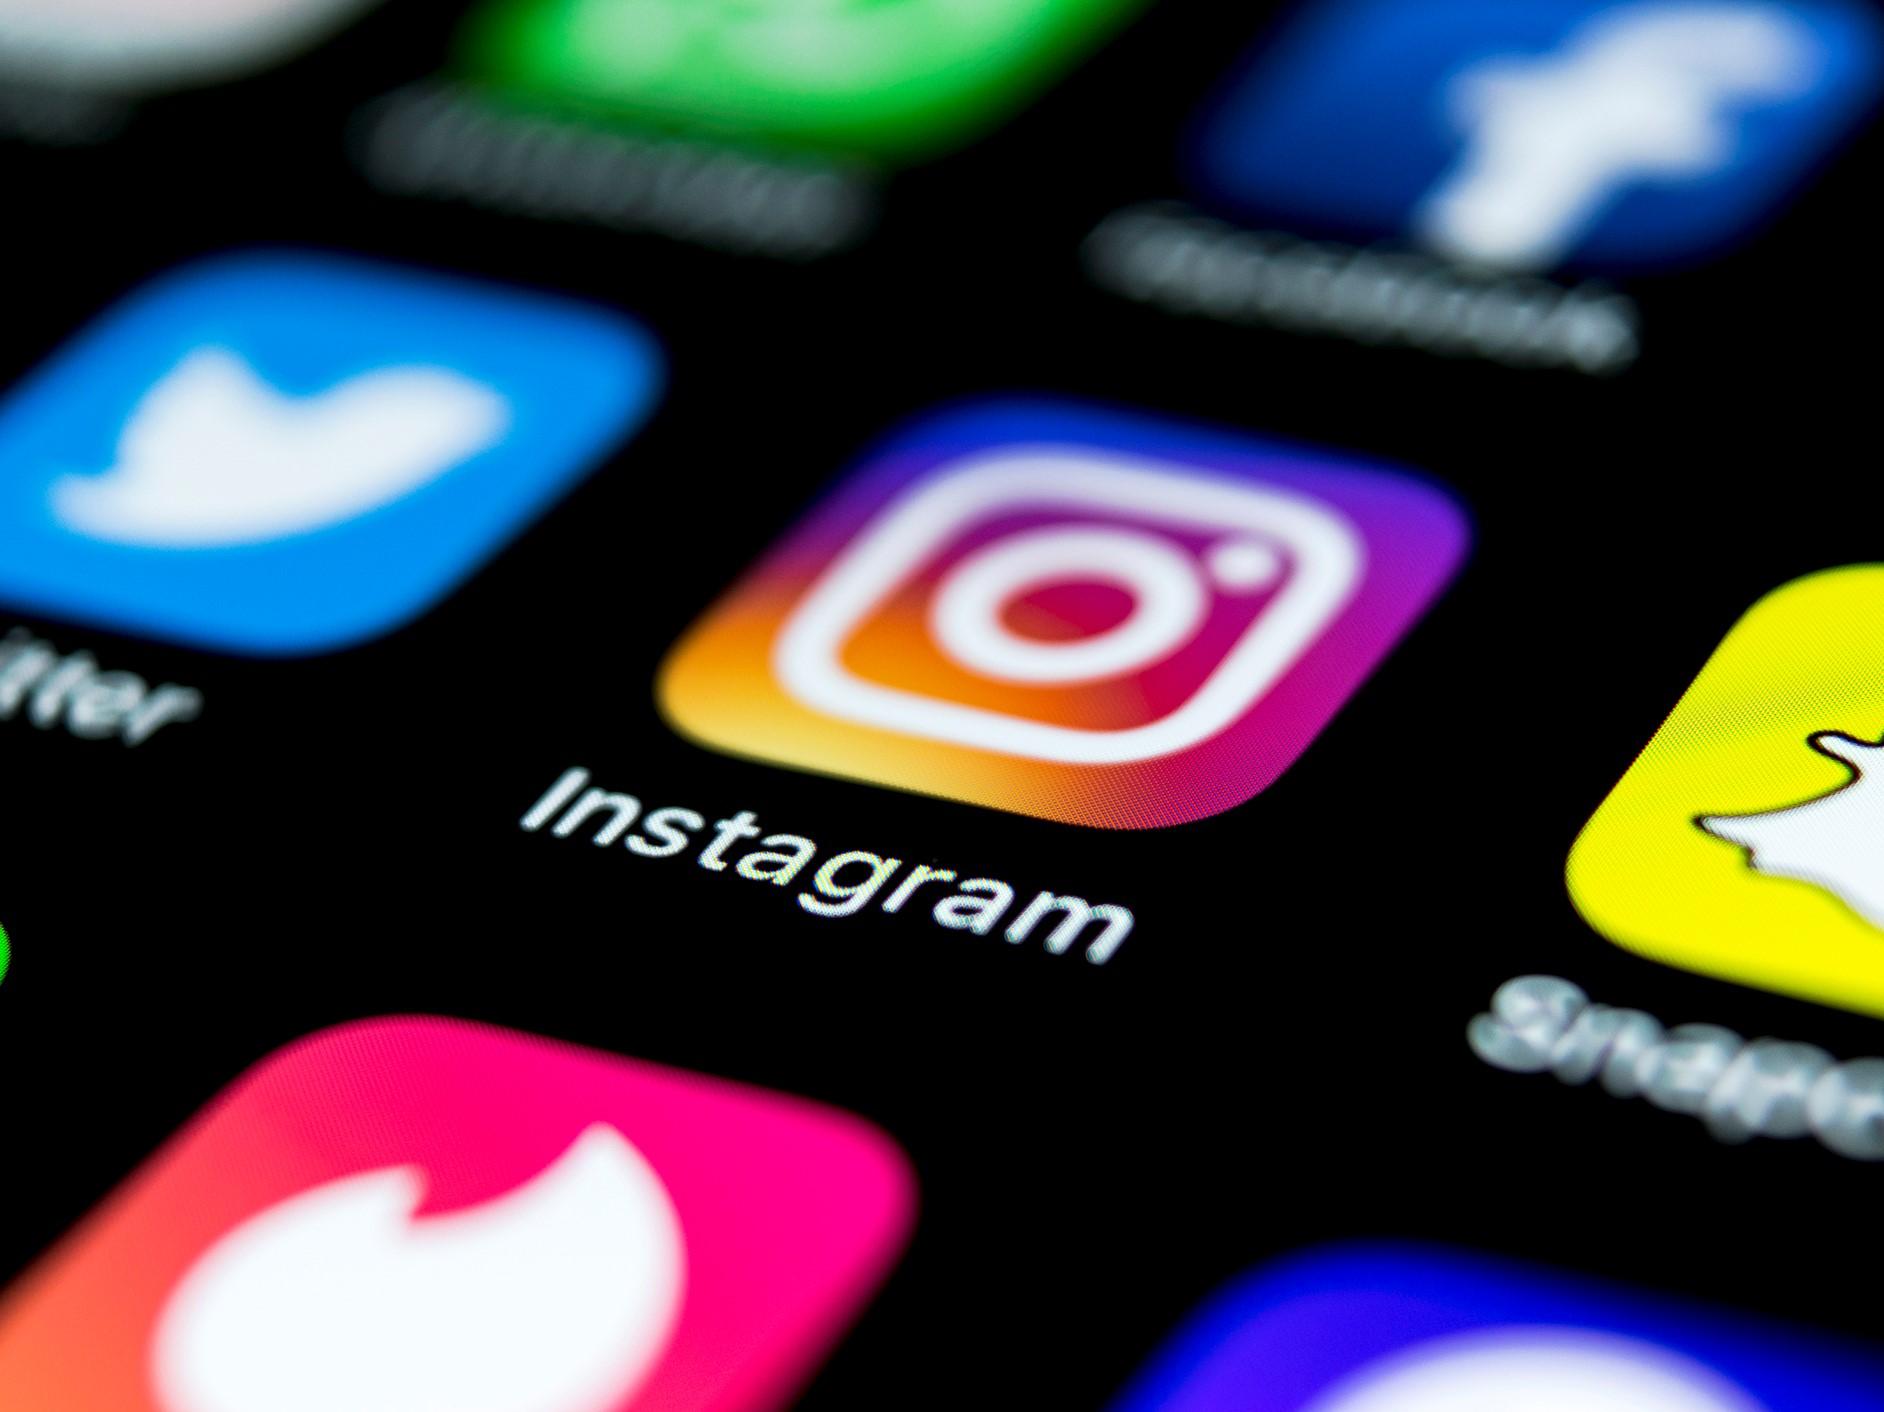 Instagram and other social media apps have faced pressure concerning the potential mental health issues arttributed to use of their platforms